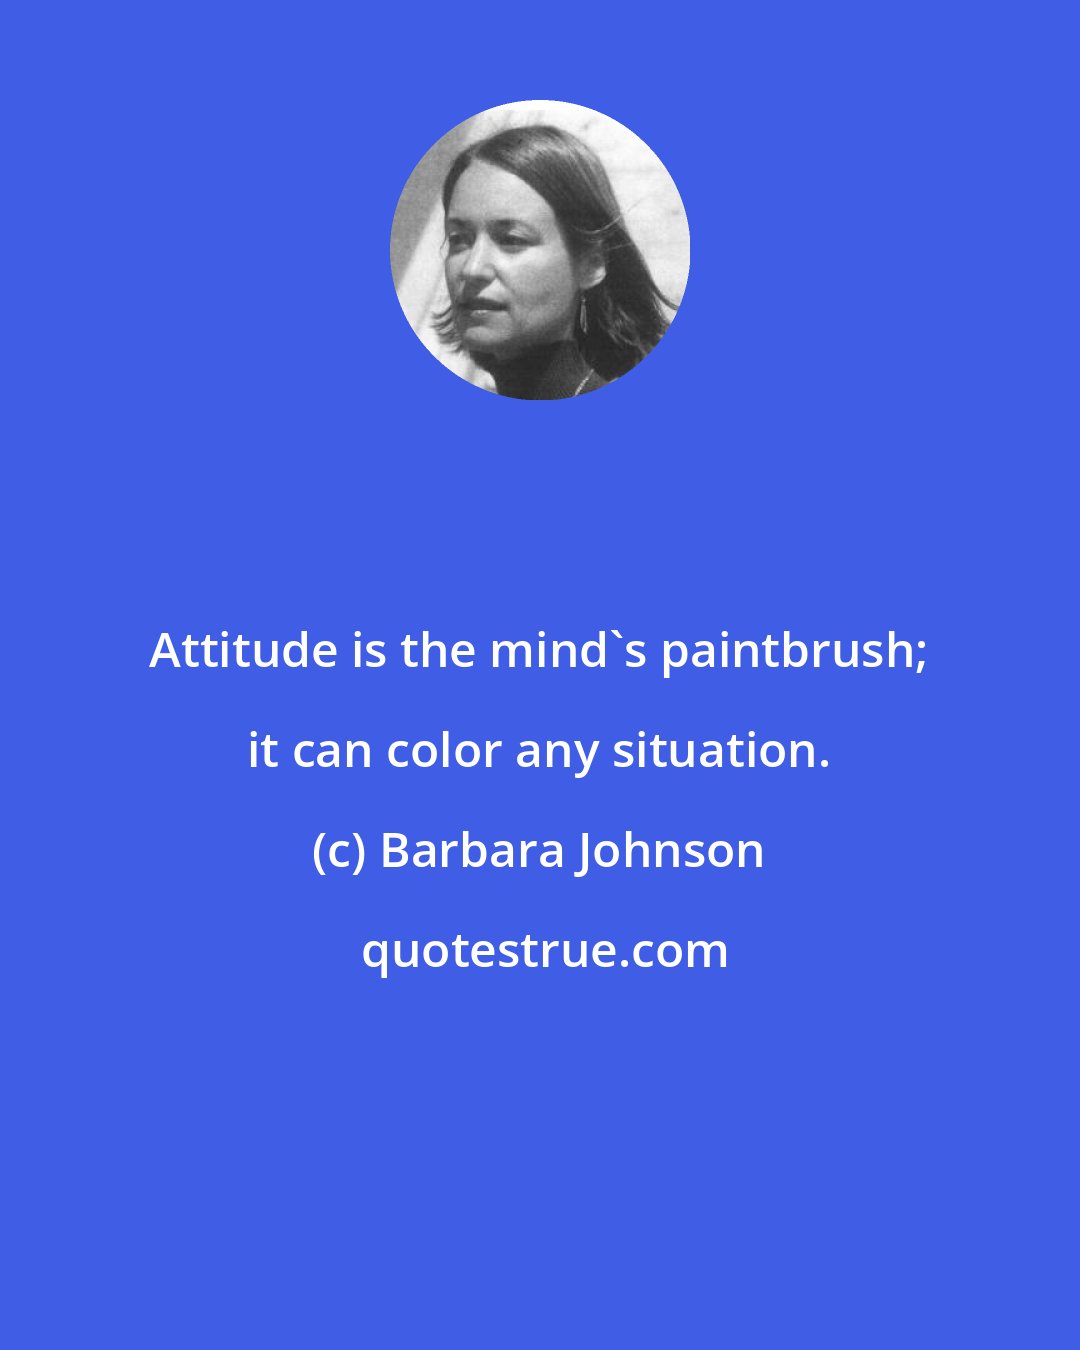 Barbara Johnson: Attitude is the mind's paintbrush; it can color any situation.